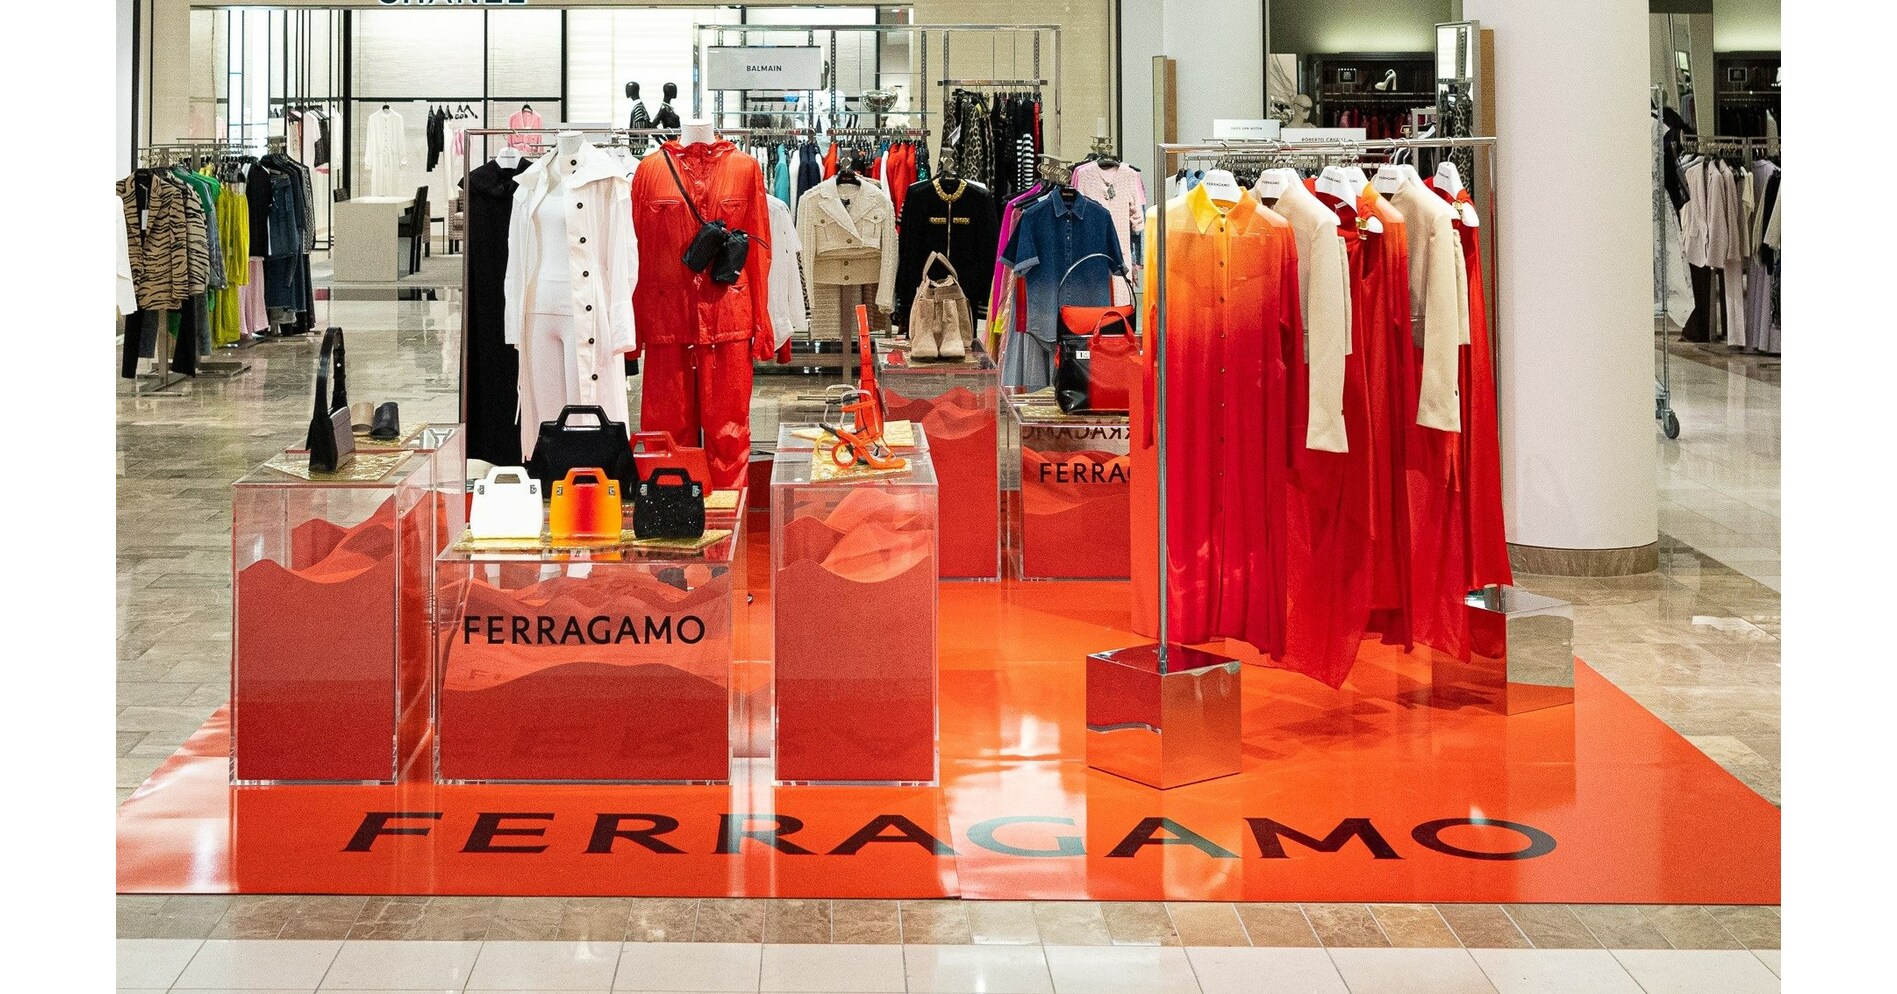 Sell to Neiman Marcus & Become a Neiman Marcus Vendor - Retail MBA